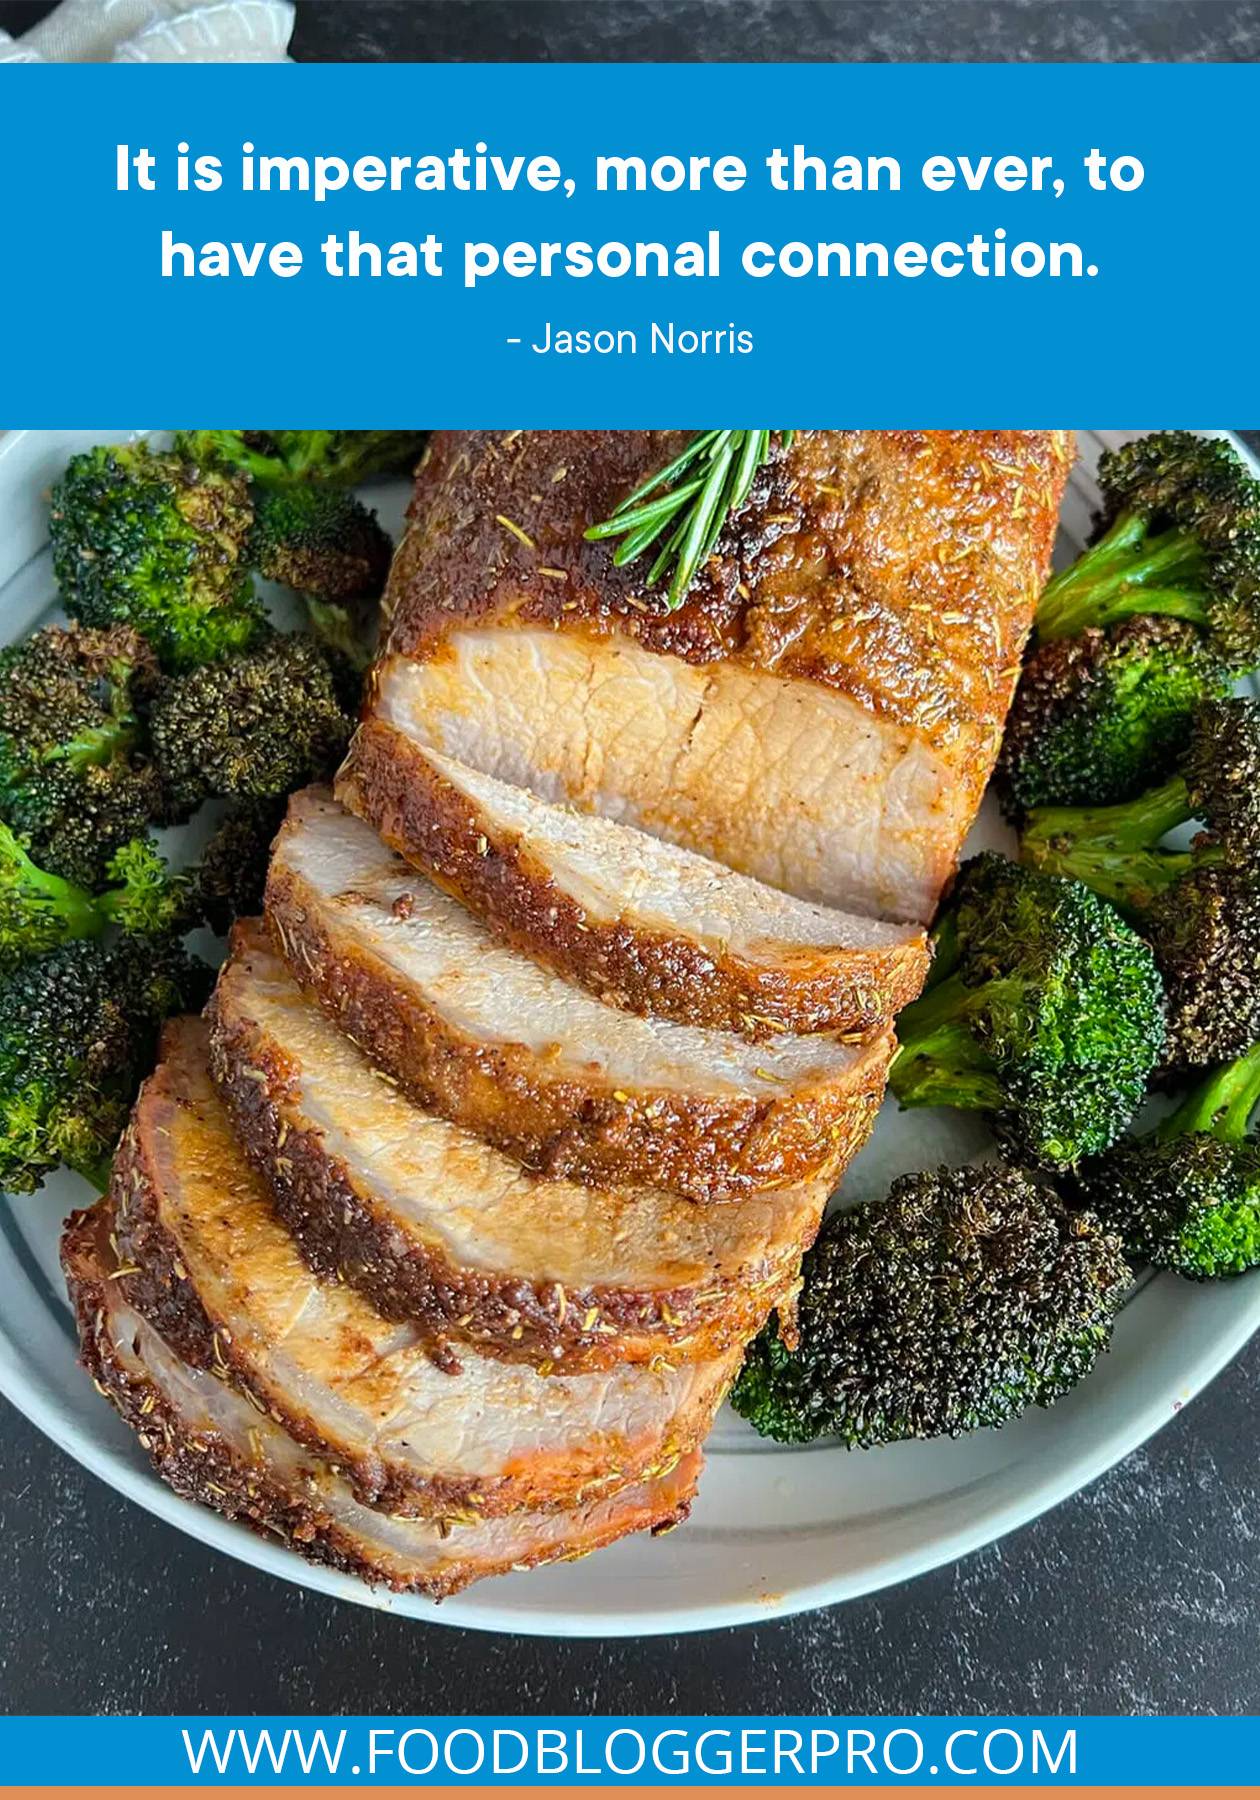 A photograph of pork loin with broccoli and a quote from Jason Norris's episode of The Food Blogger Pro Podcast that reads: "It is imperative, more than ever, to have that personal connection."